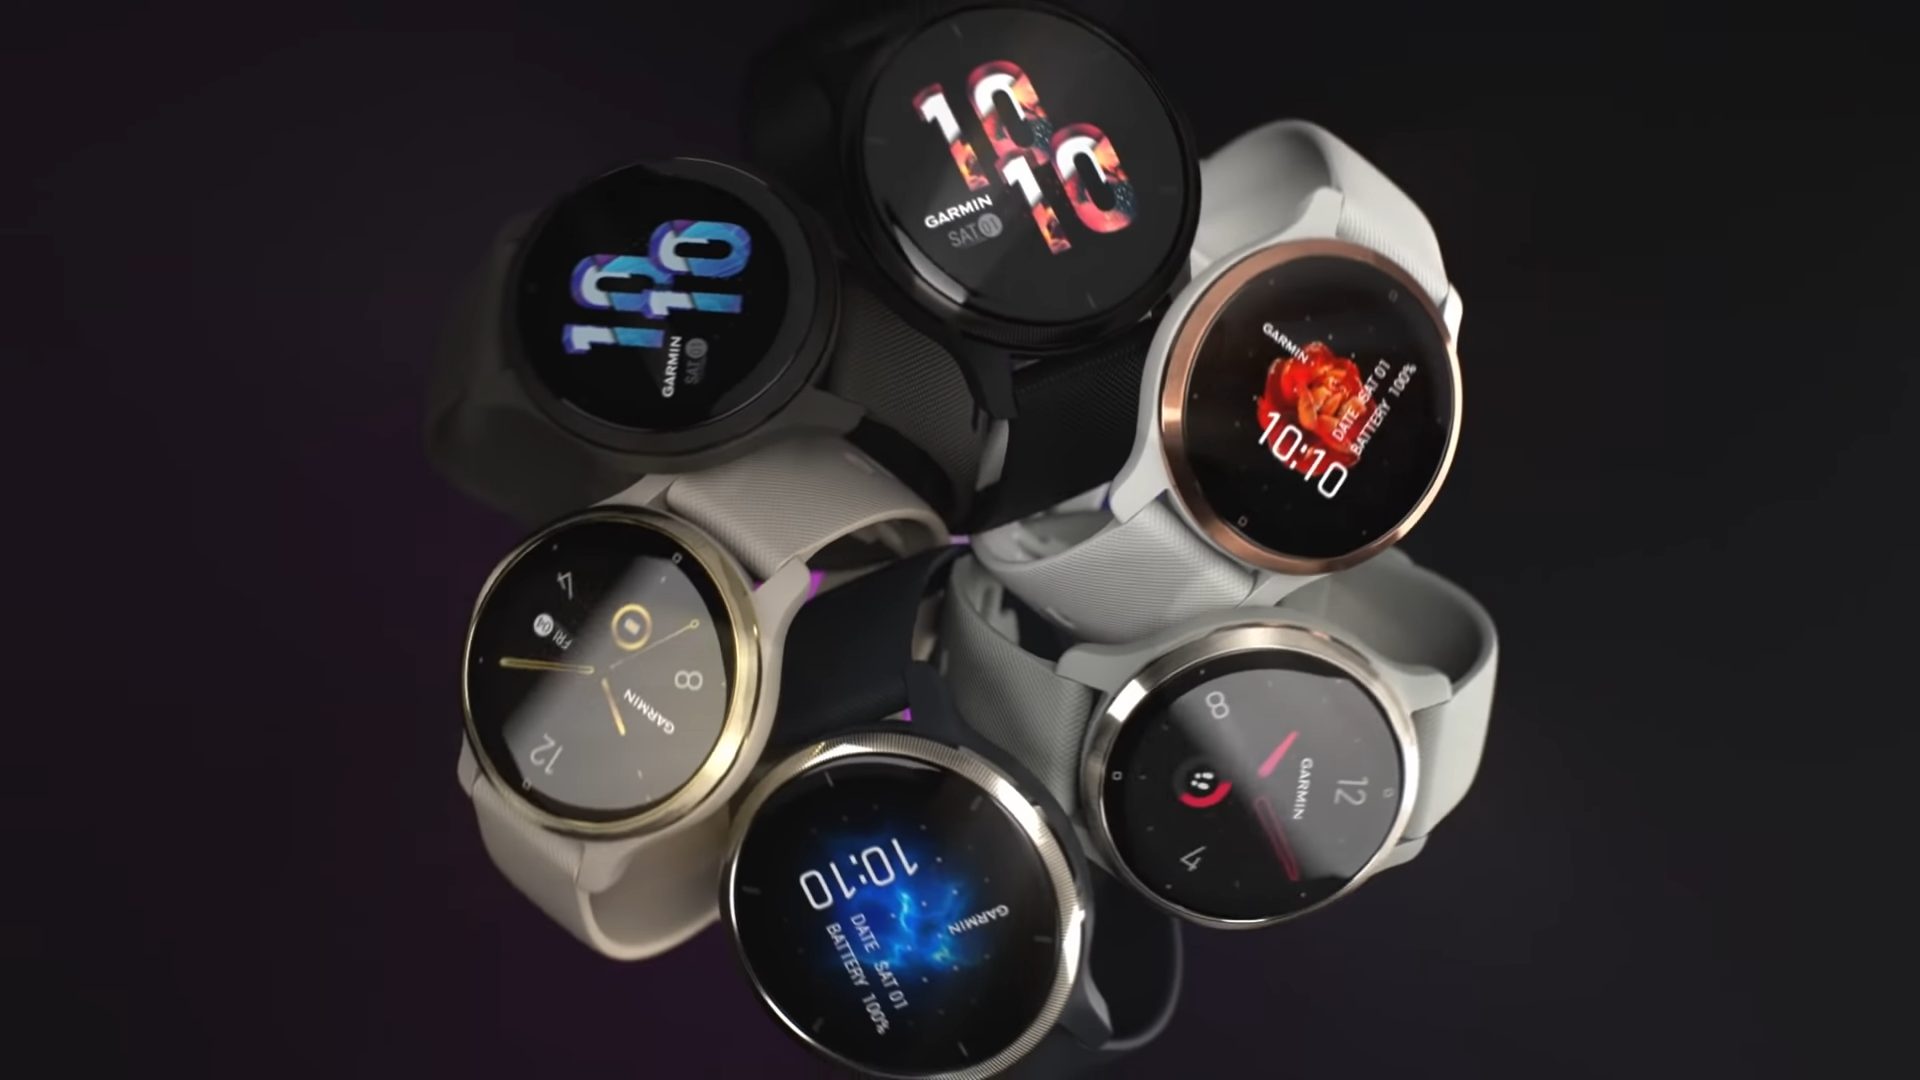 Venu 2 Series Smartwatches in a bundle with the black background